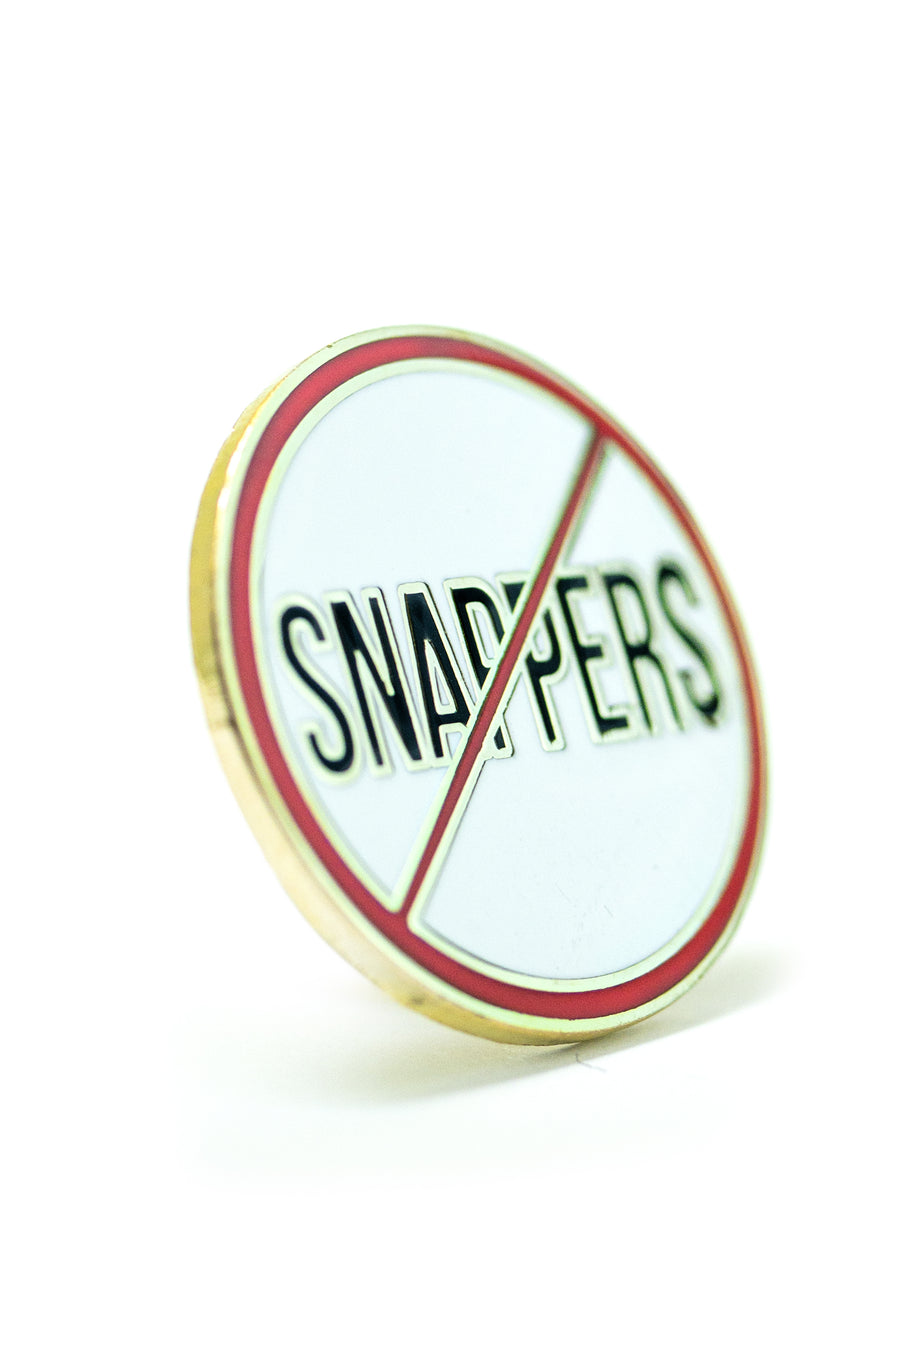 No Snappers Pin